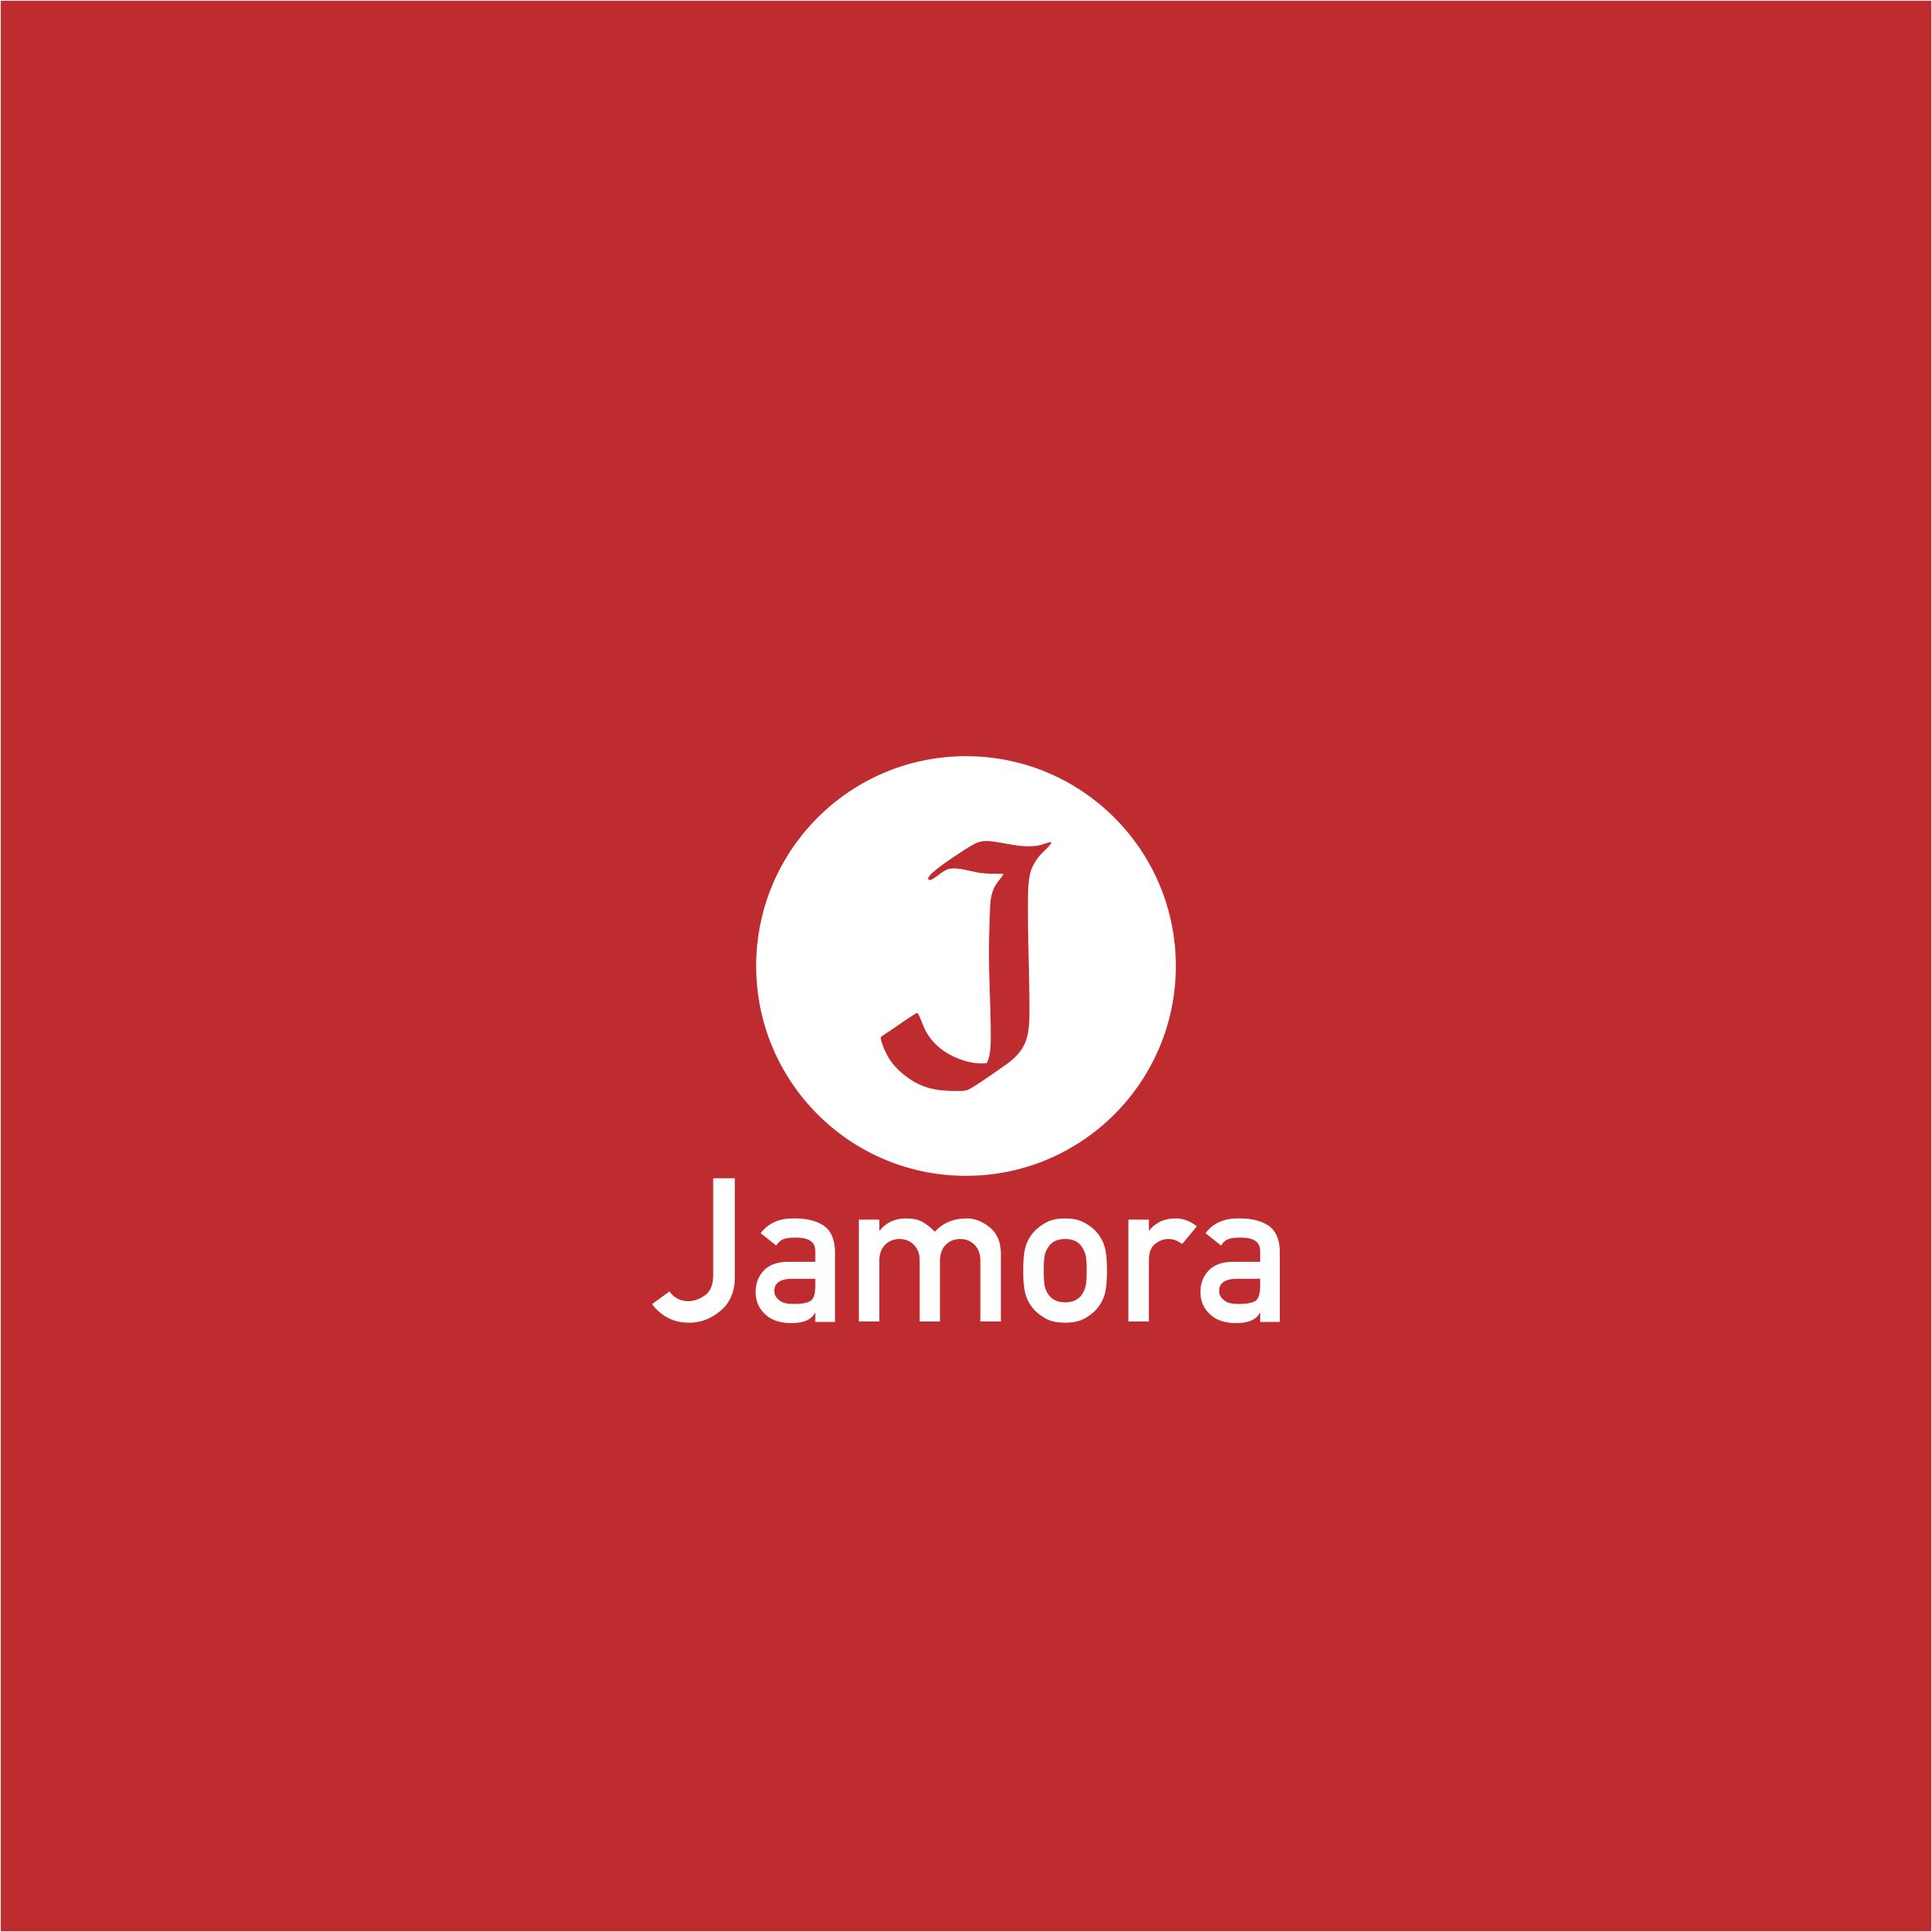 Privacy Policy for Jamora